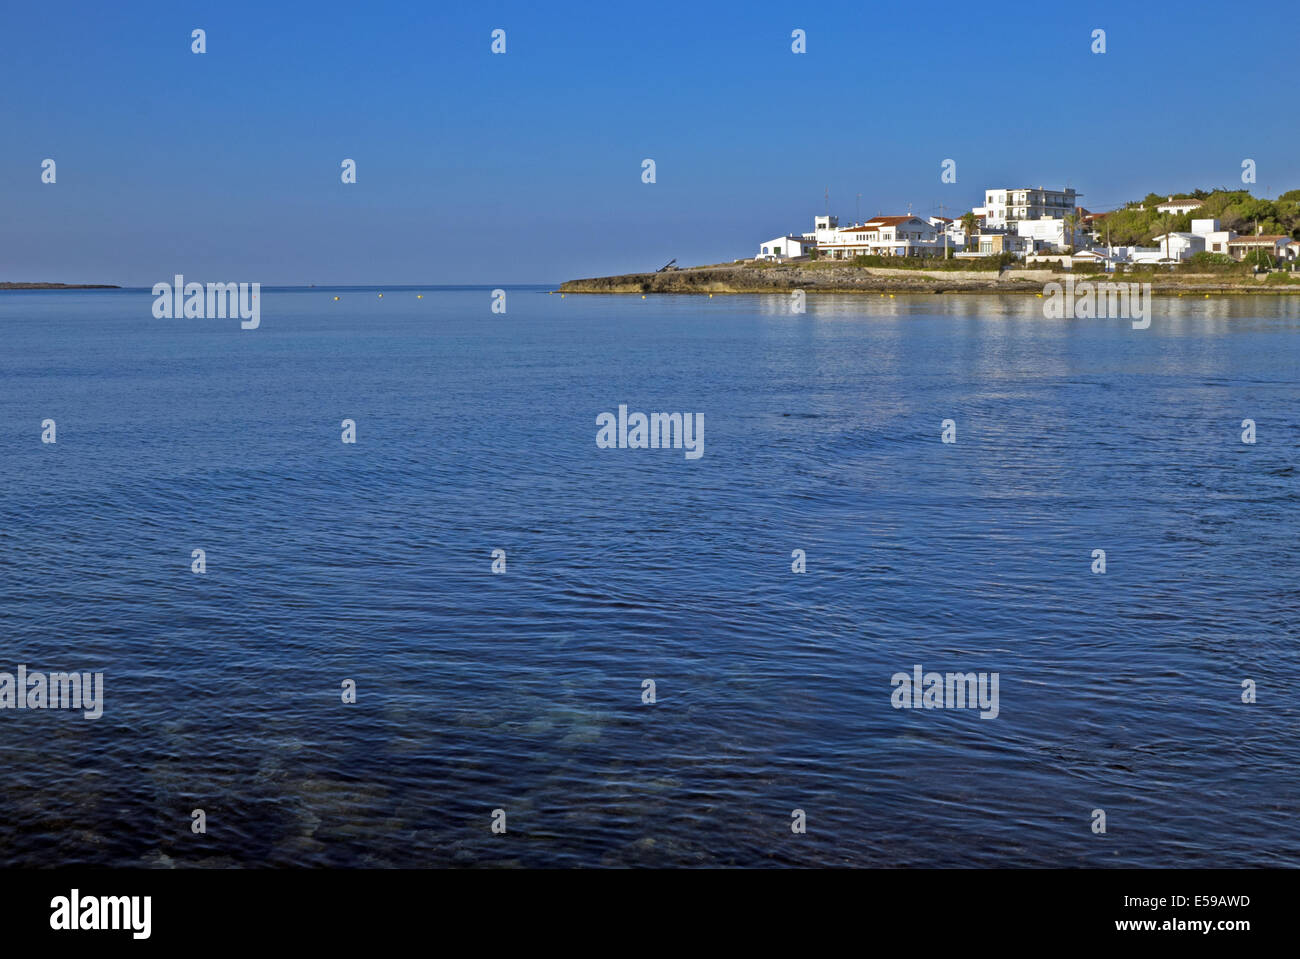 Early morning view of traditional village of Punta Prima, Menorca, Spain. Clear cloudless blue skies and blue Mediterranean Sea. Stock Photo